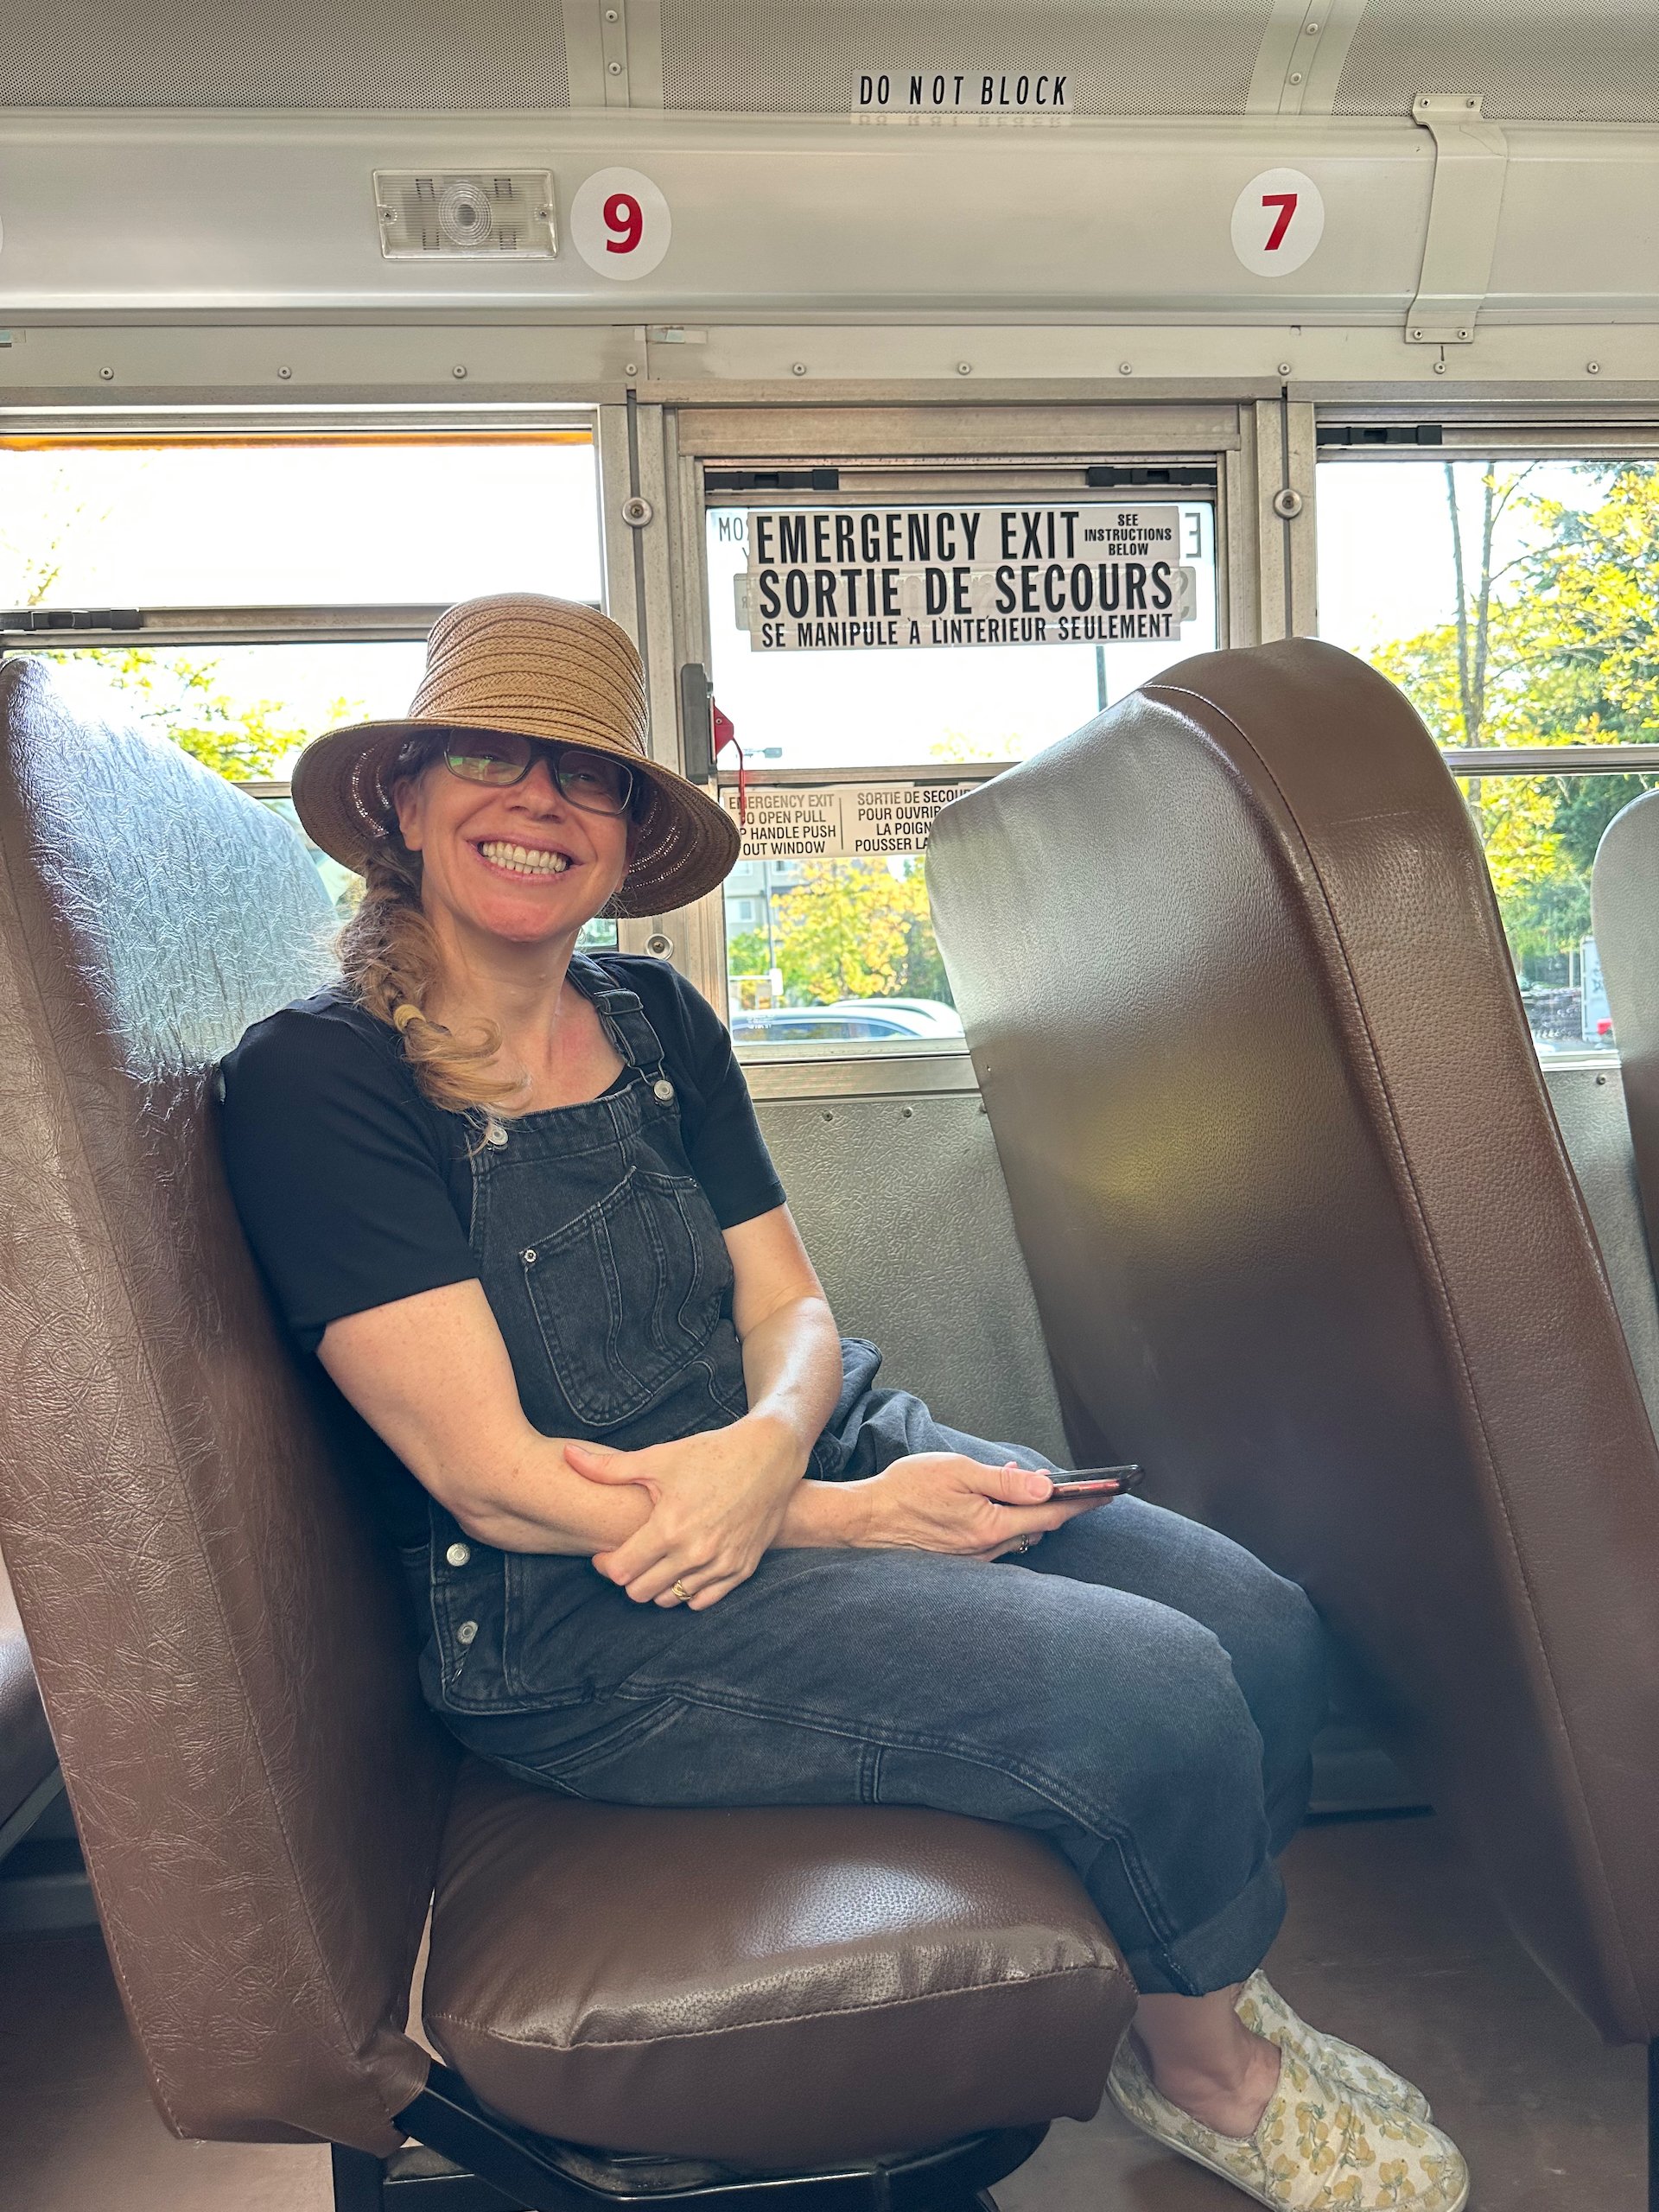  To get to the event, we decided to take a shuttle from a local subway station. Figured it was better than driving. Sadly, it was an old-school school bus - that brought back some memories! 